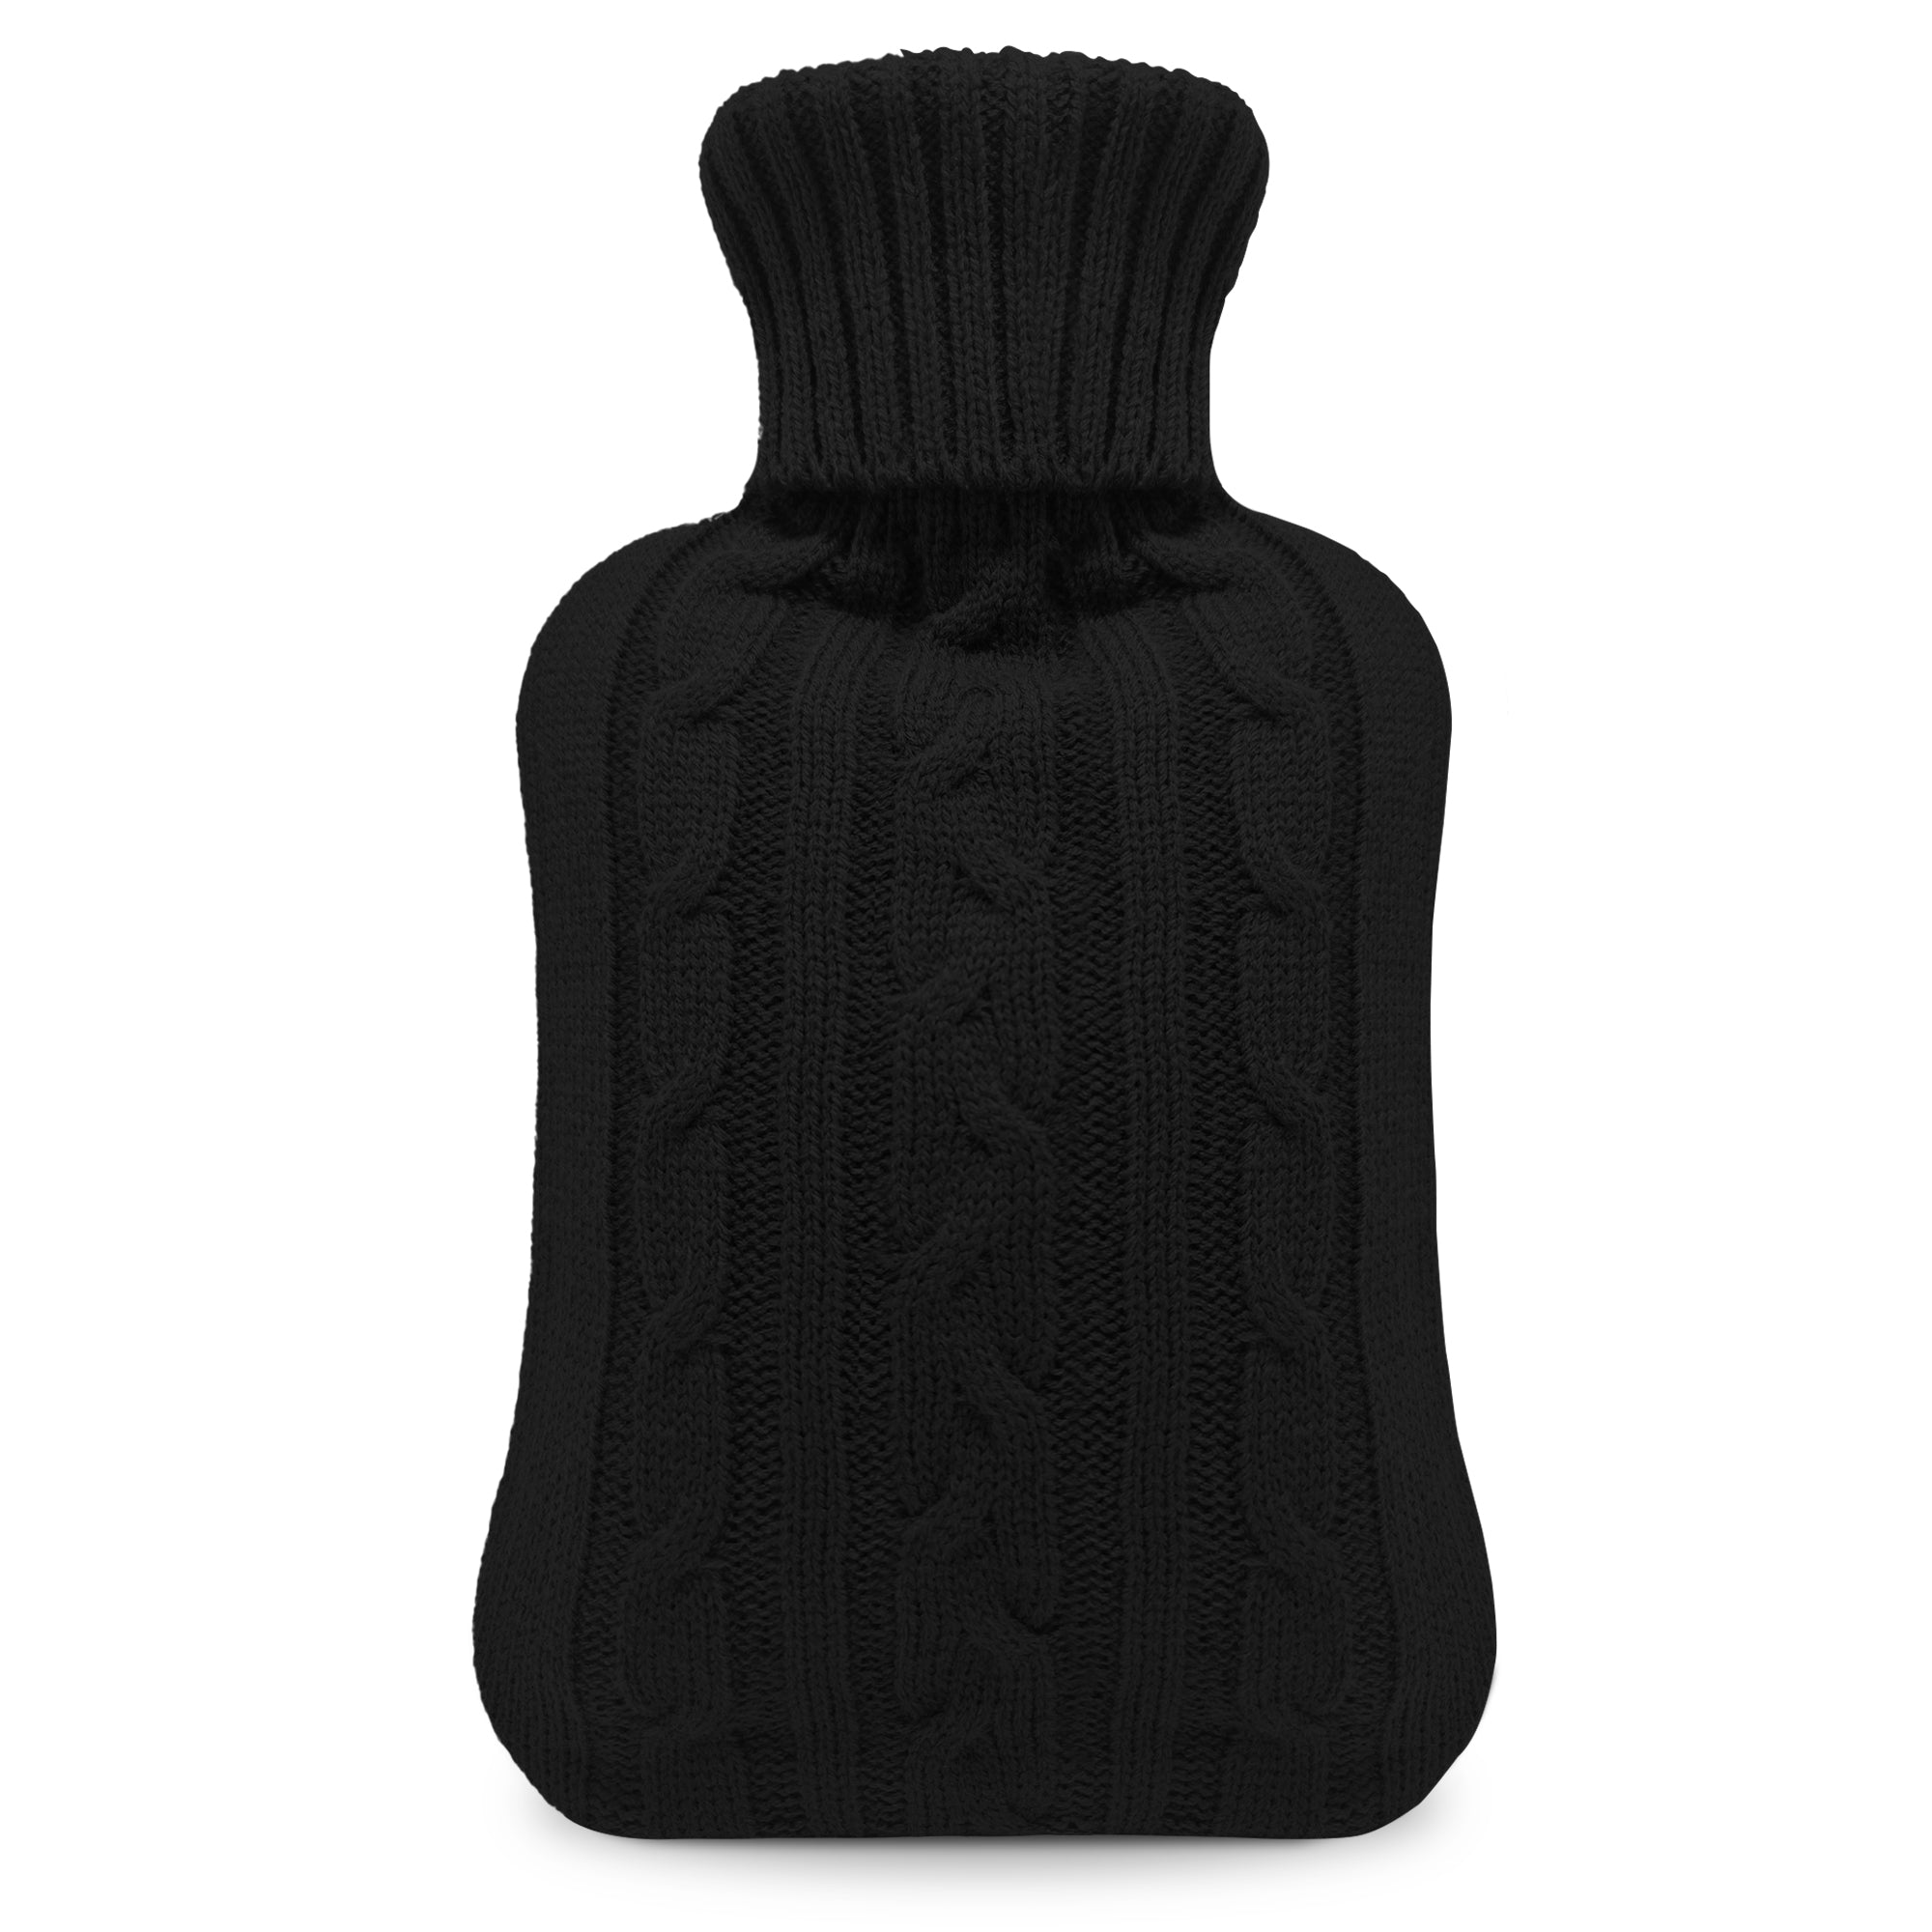 Luxury Hot Water Bottle - Extra Soft Cover, Thermal Rubber Bottle Covered with Premium Faux Fur